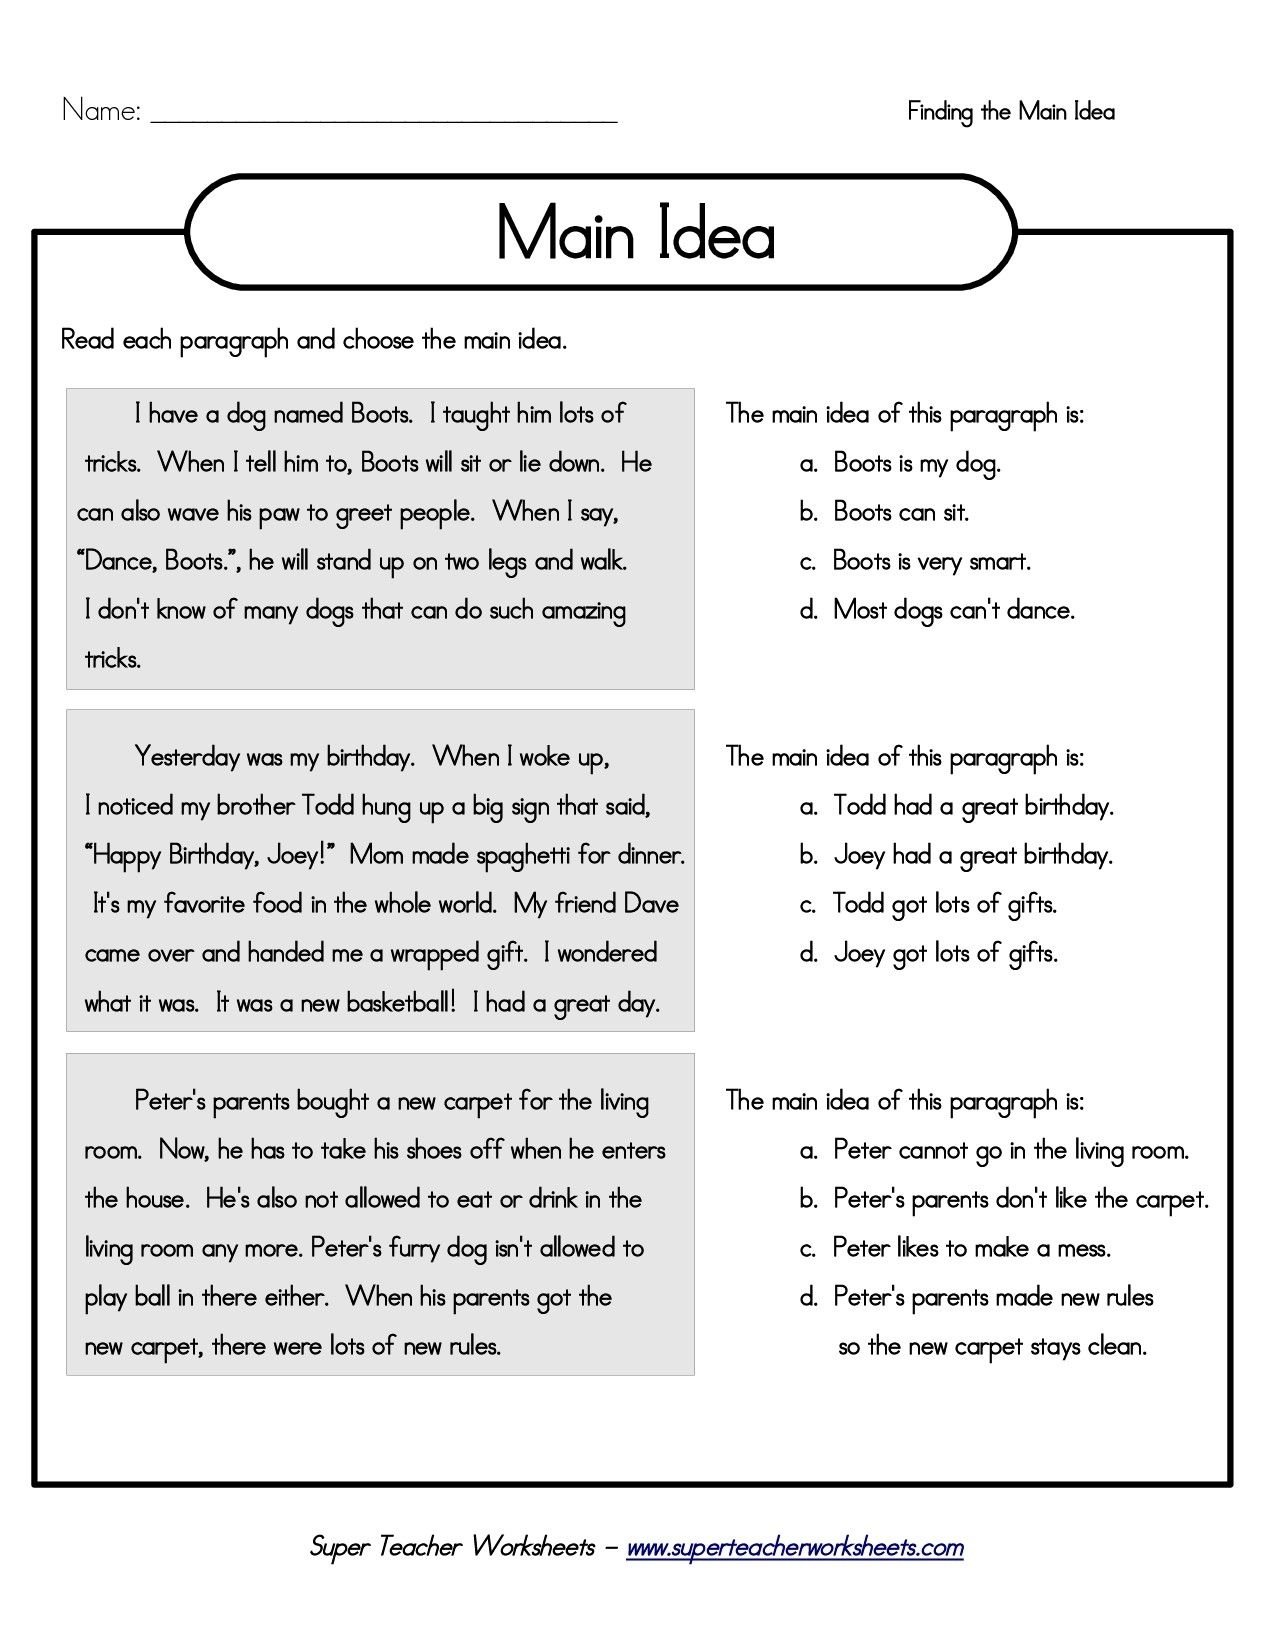 10 Unique Finding The Main Idea Powerpoint reading worksheets for 3rd grade 1happywallpapers high 1 2022